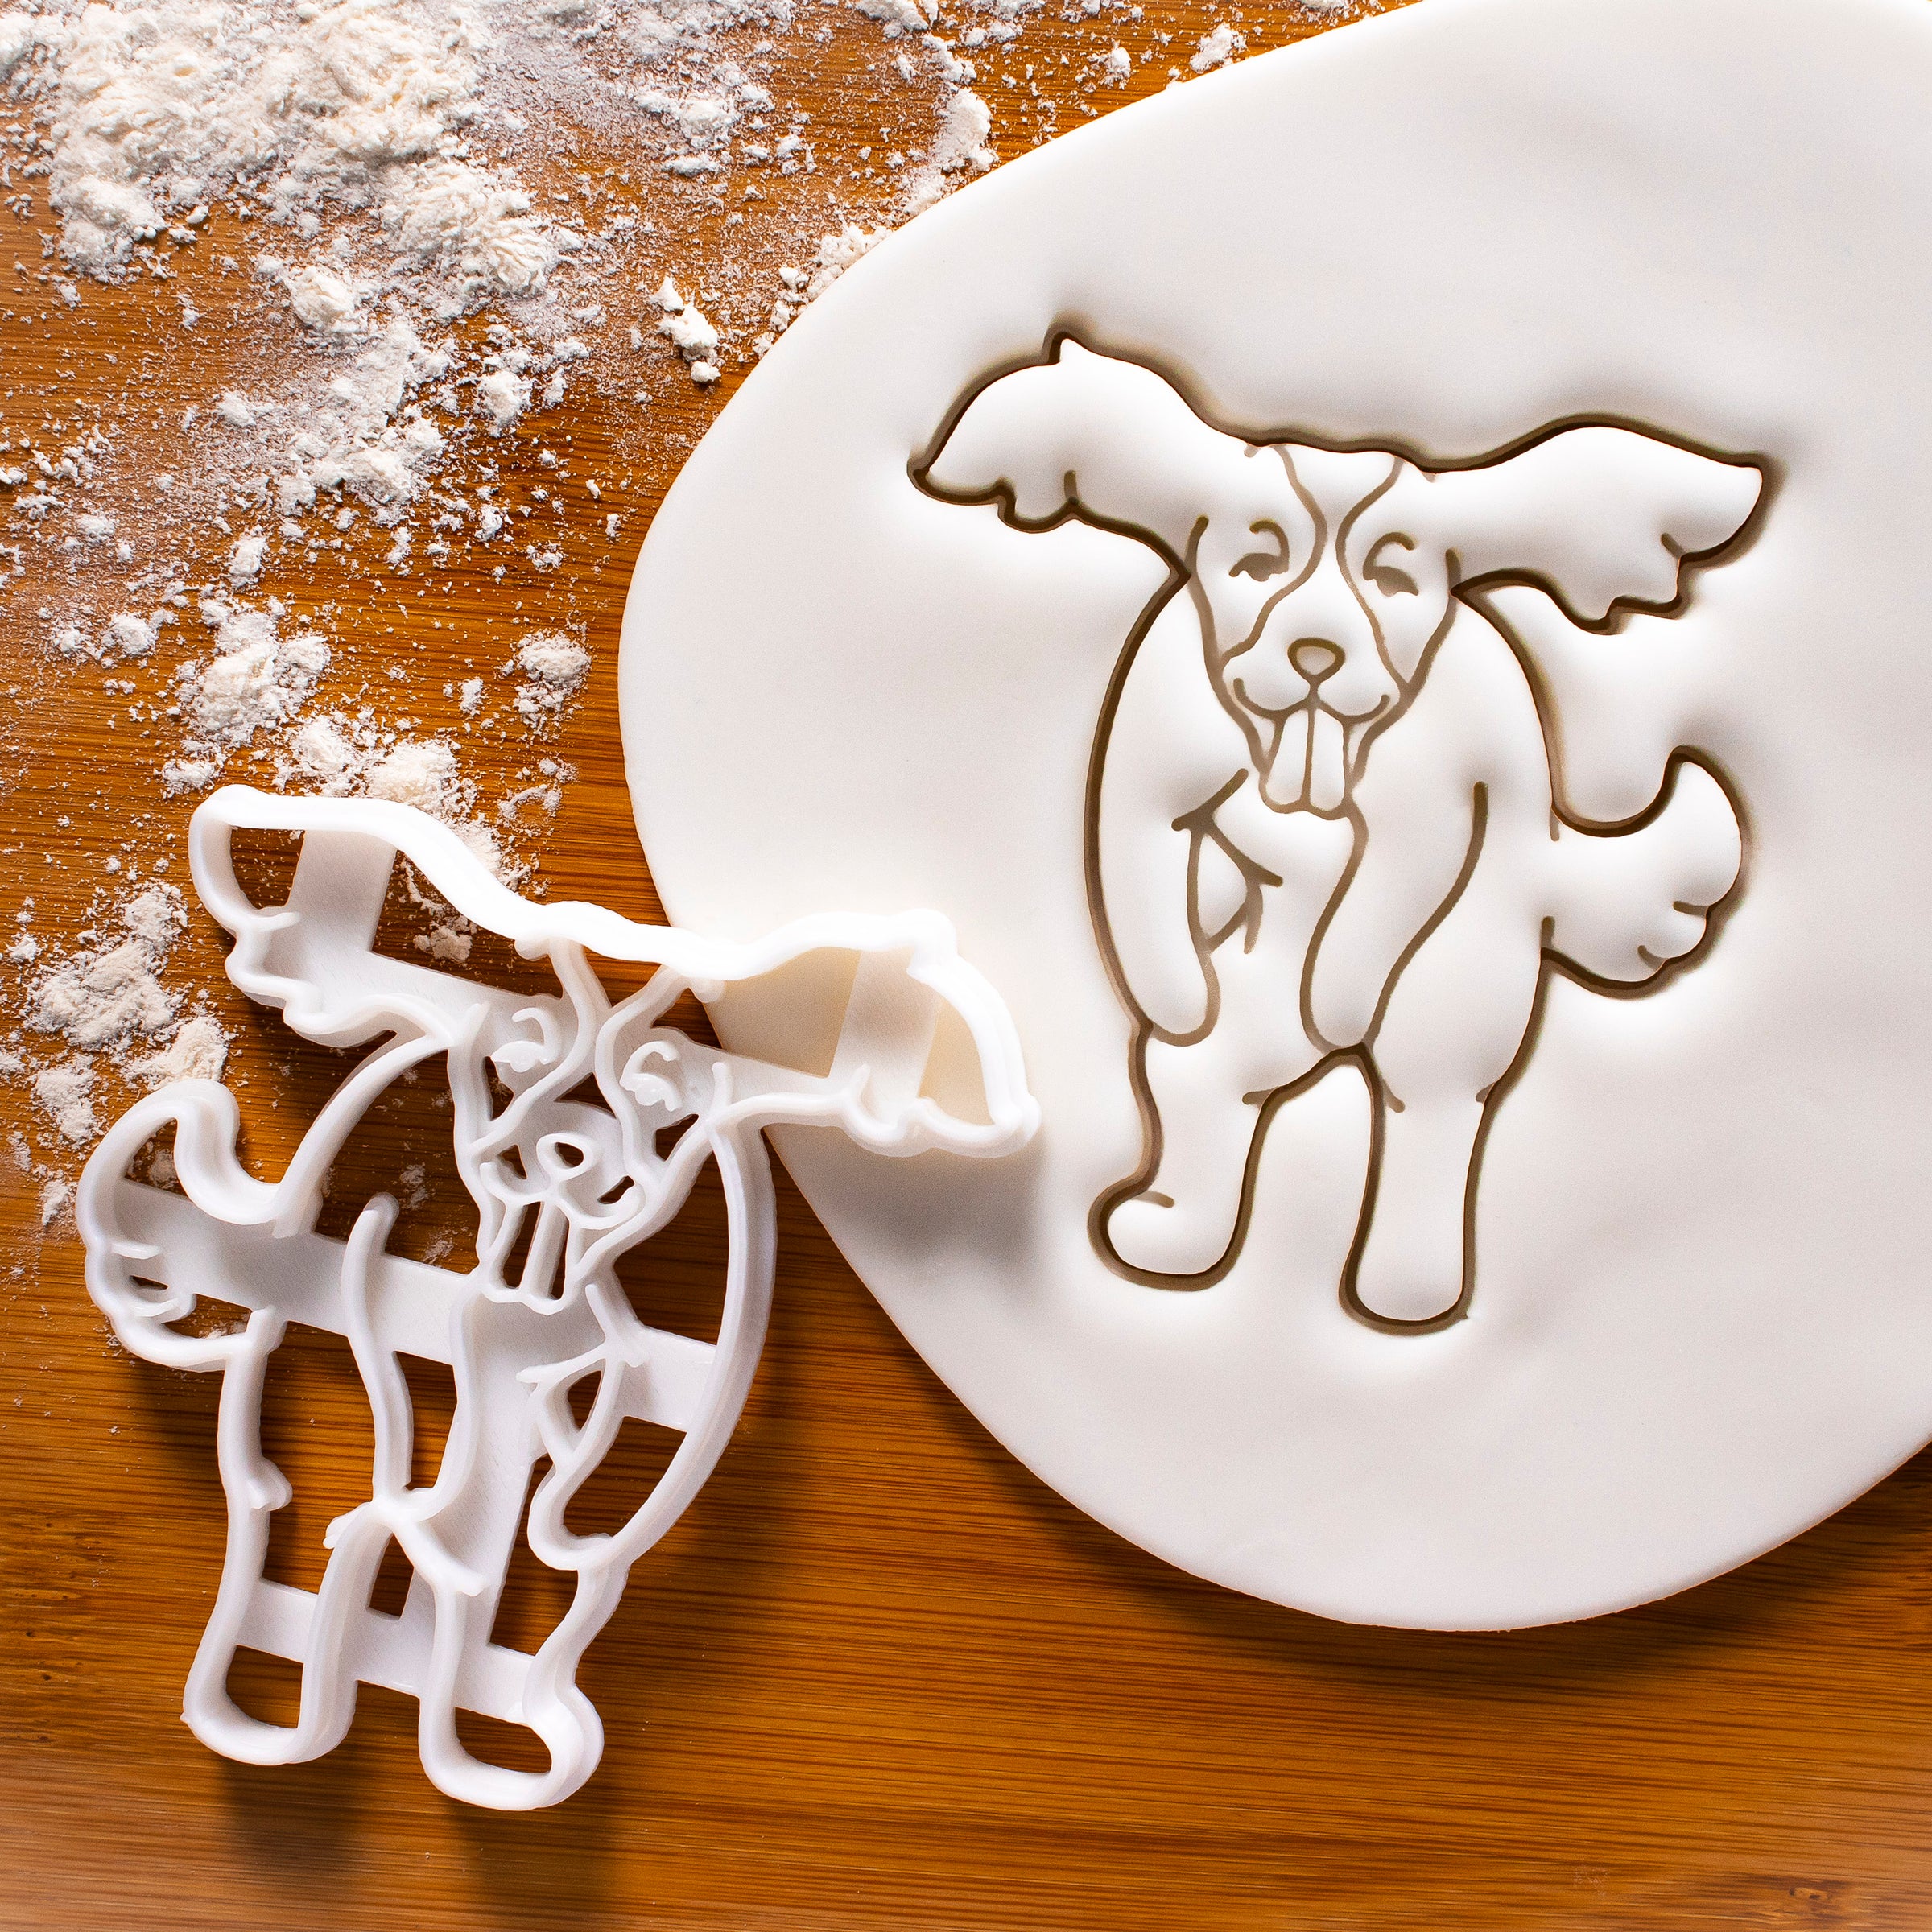 English Springer Spaniel Jumping Cookie Cutter